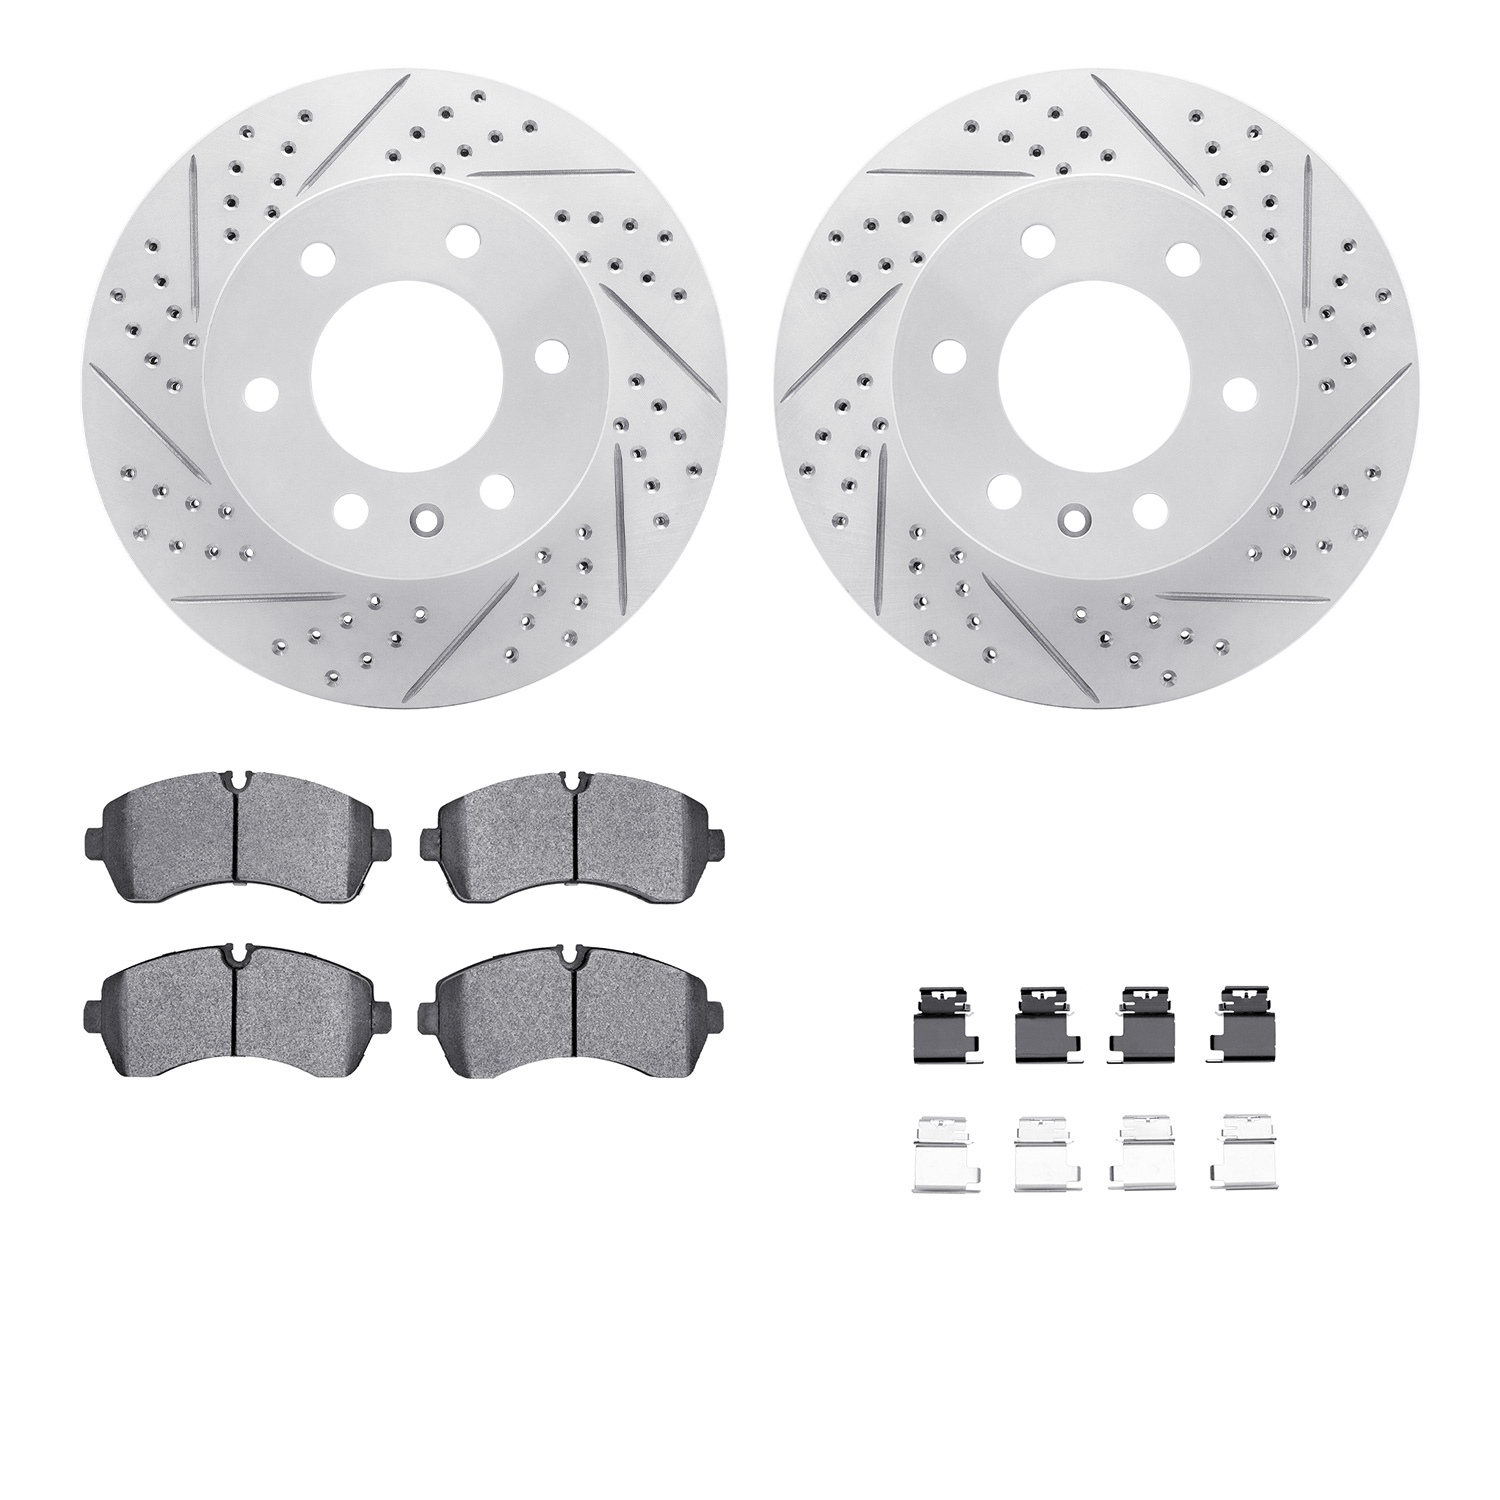 2512-40021 Geoperformance Drilled/Slotted Rotors w/5000 Advanced Brake Pads Kit & Hardware, Fits Select Multiple Makes/Models, P